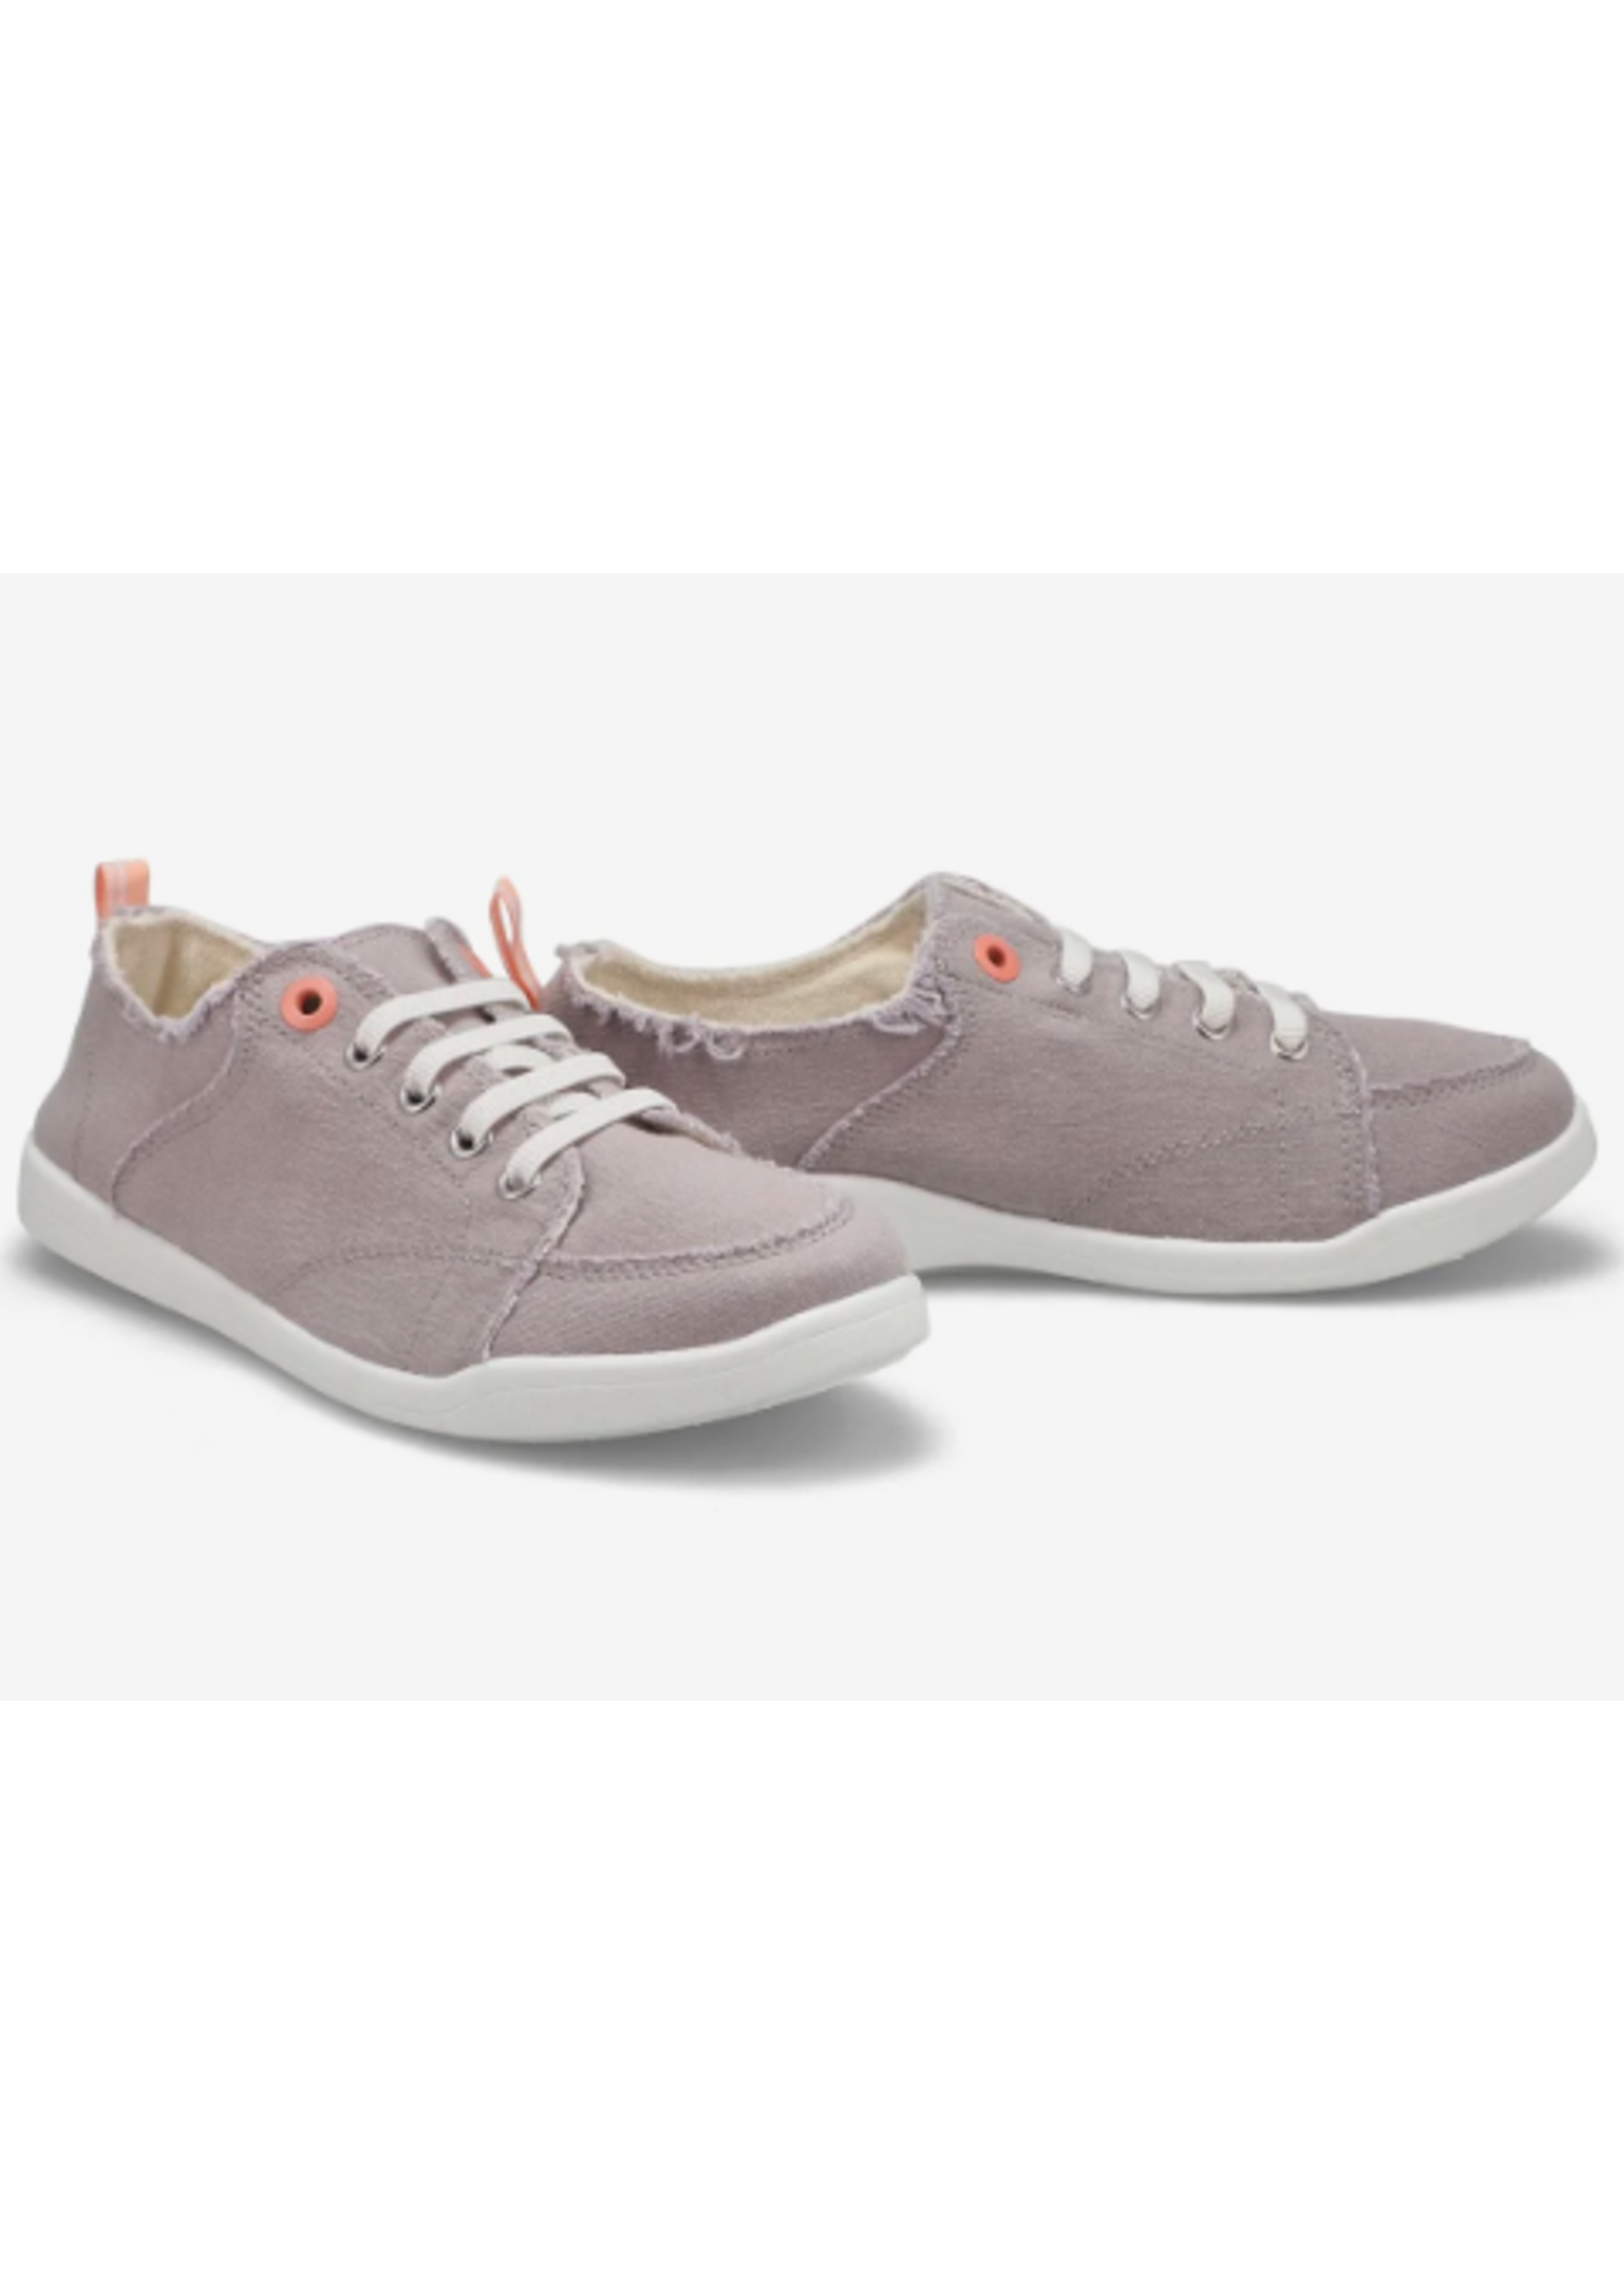 VIONIC VENICE PISMO CASUAL SNEAKER with Arch Support